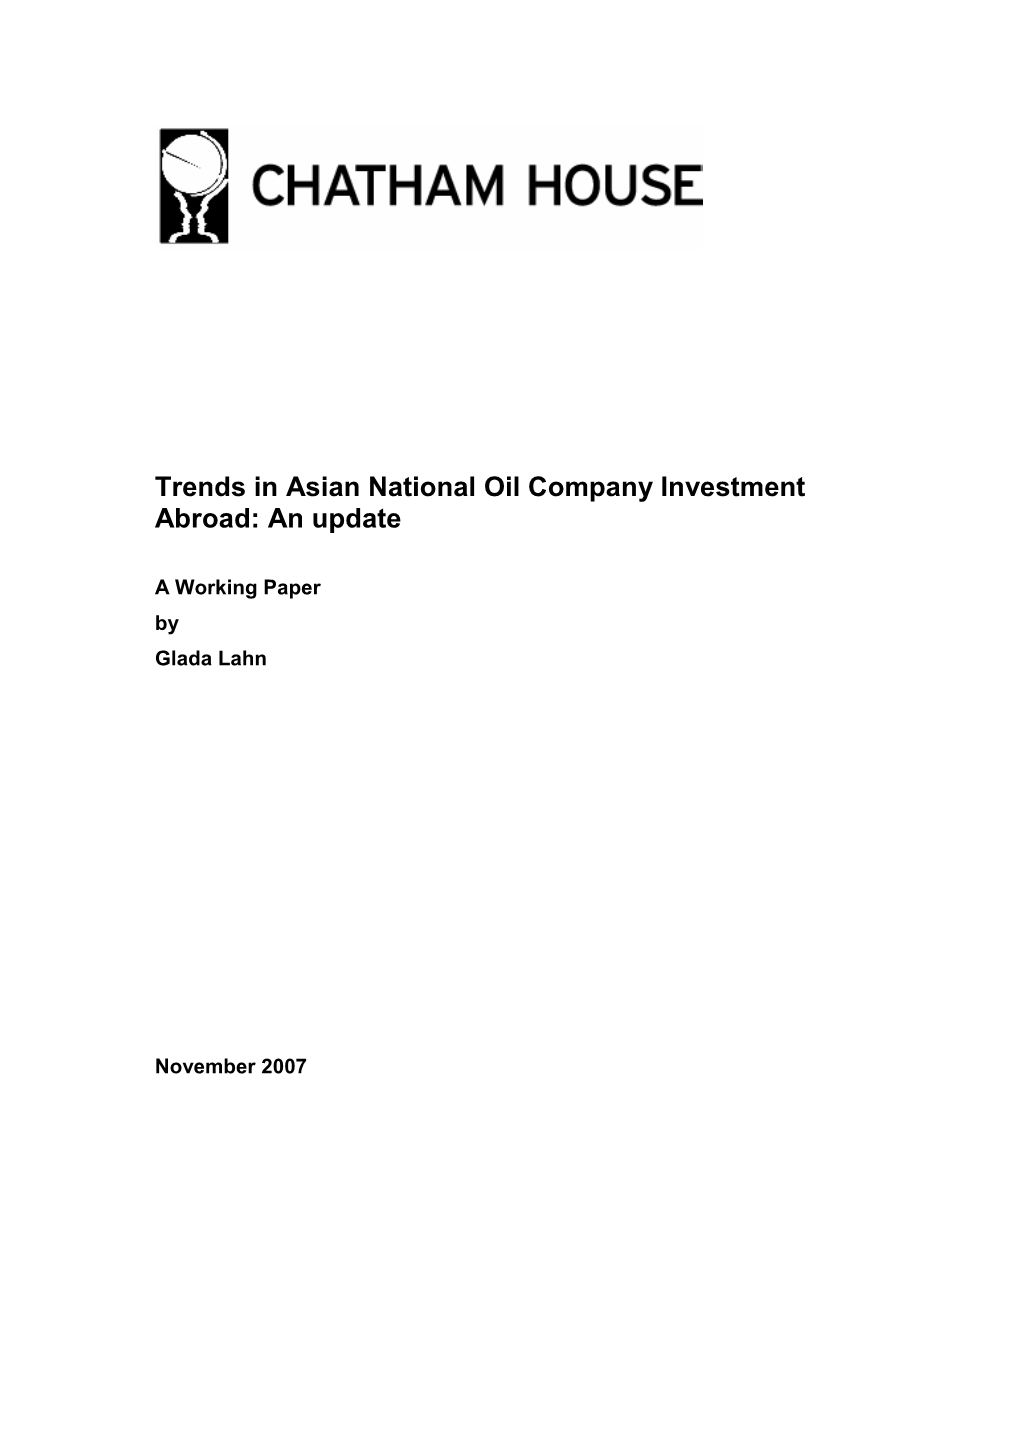 Trends in Asian National Oil Company Investment Abroad: an Update